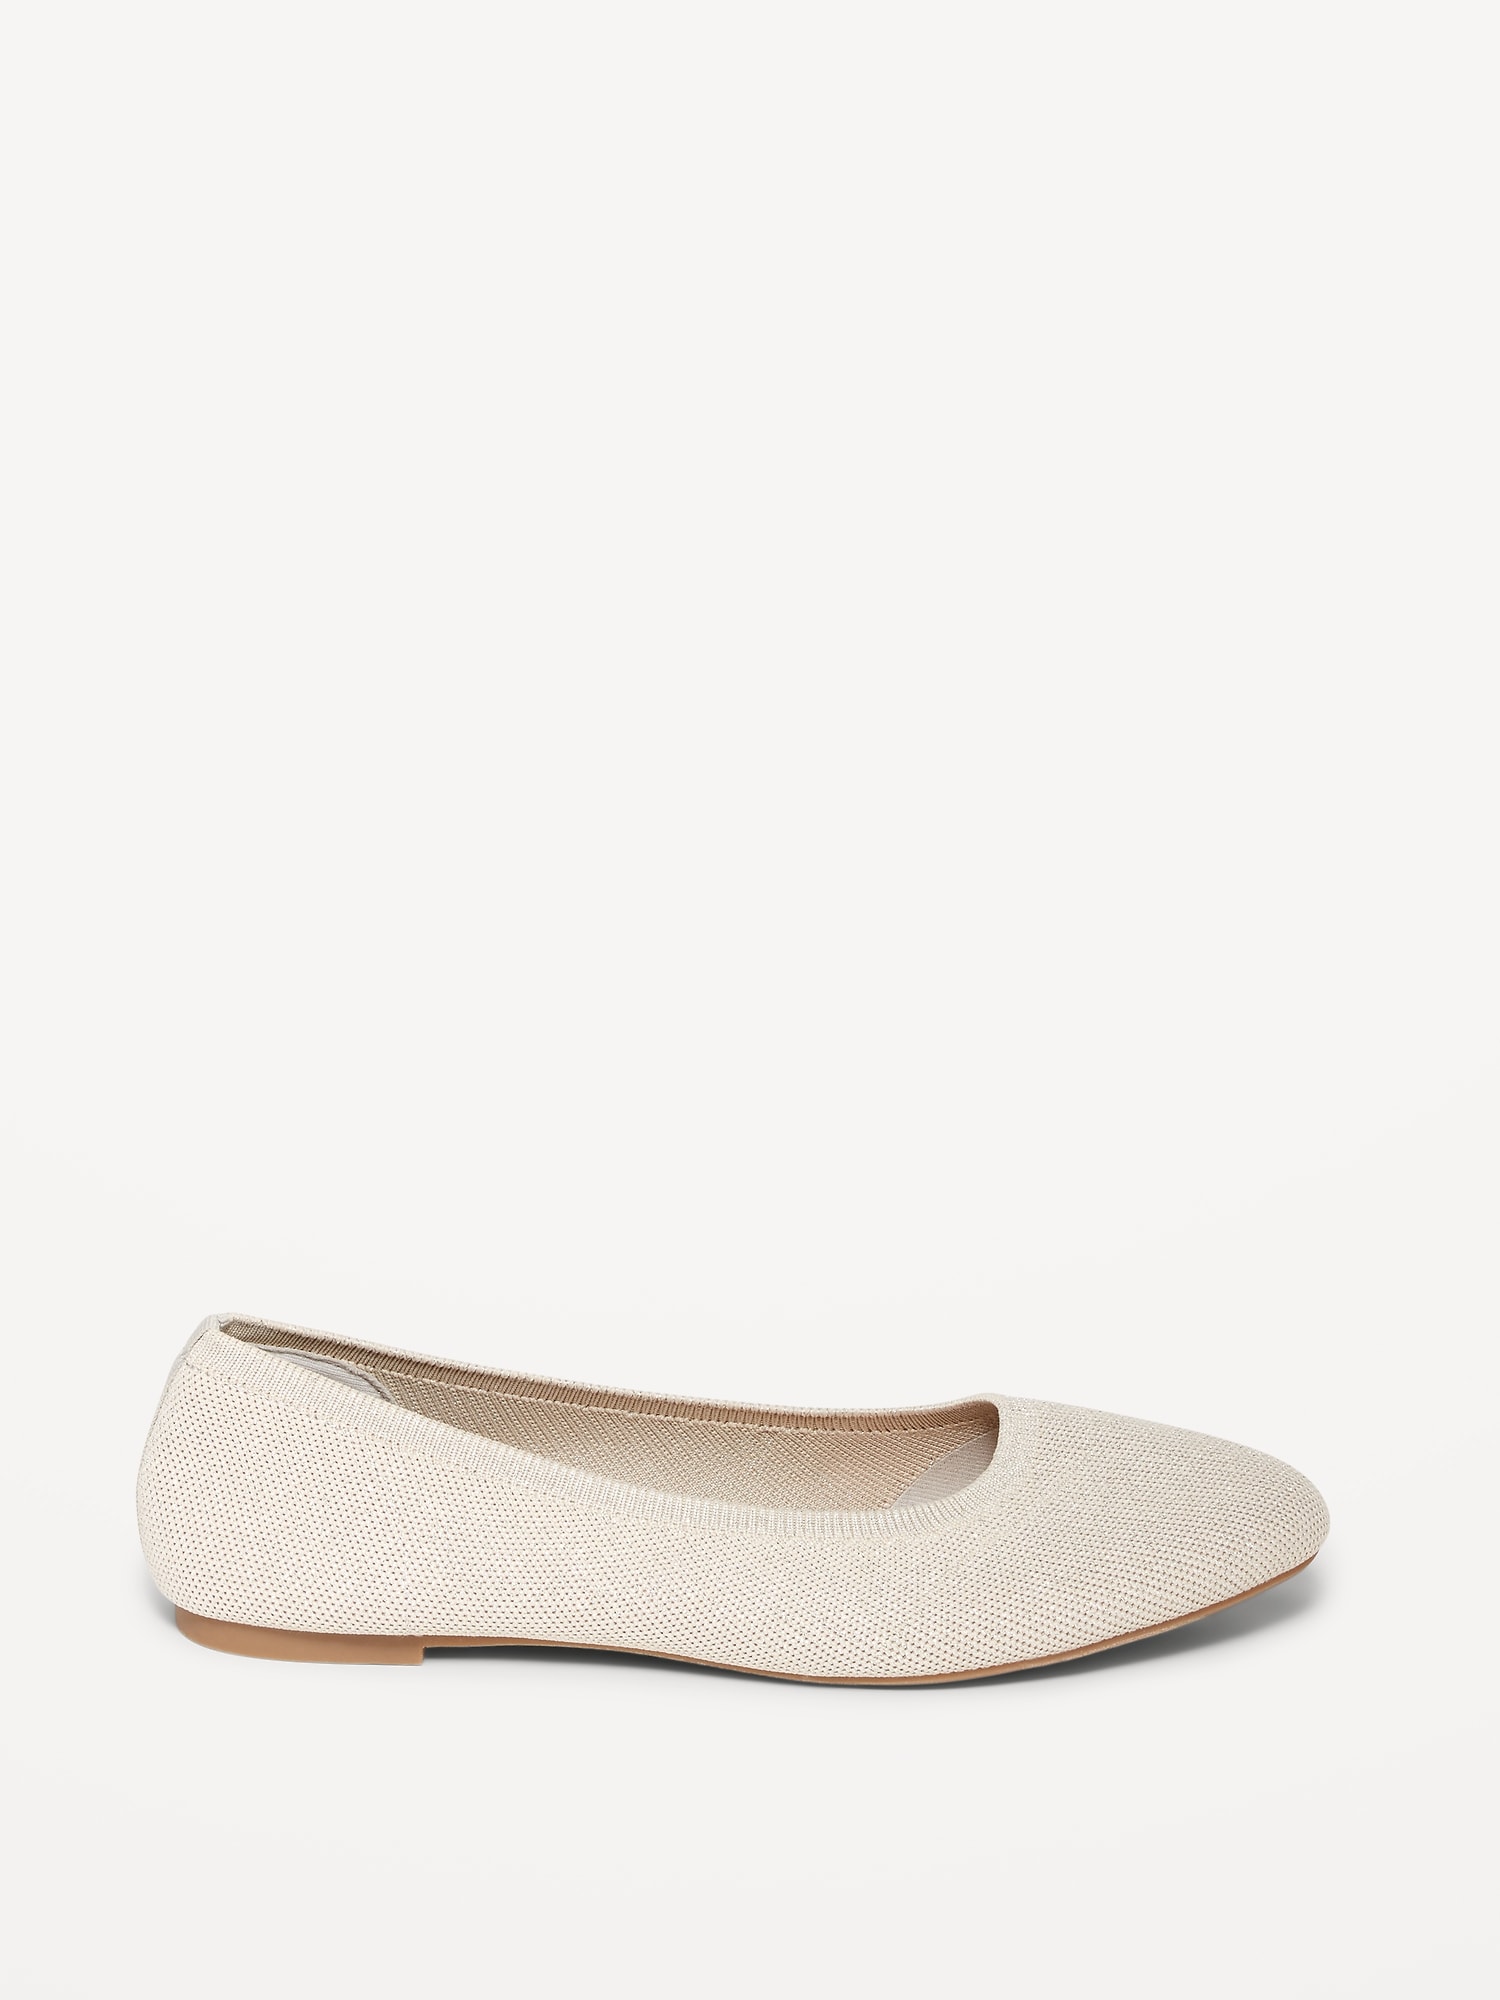 Knit Almond-Toe Ballet Flats For Women | Old Navy